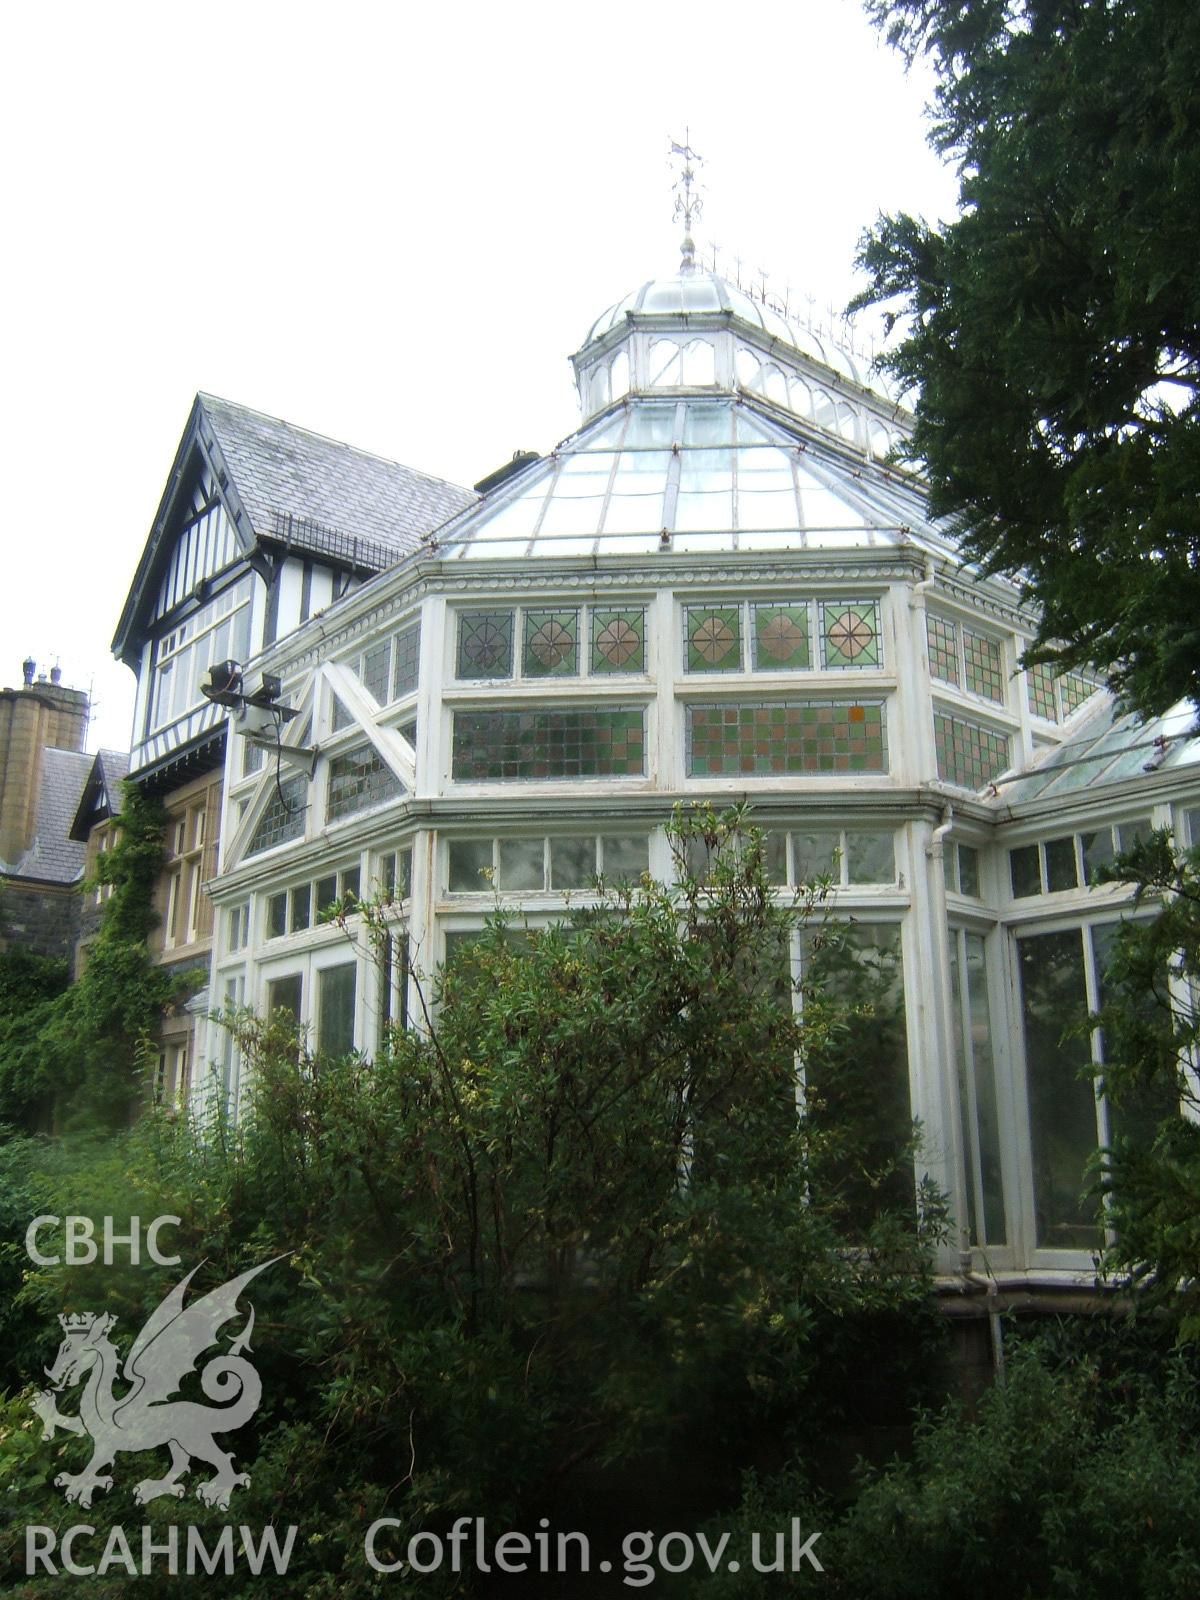 The large Conservatory of 1882 by Messenger & Co. from the south-east.